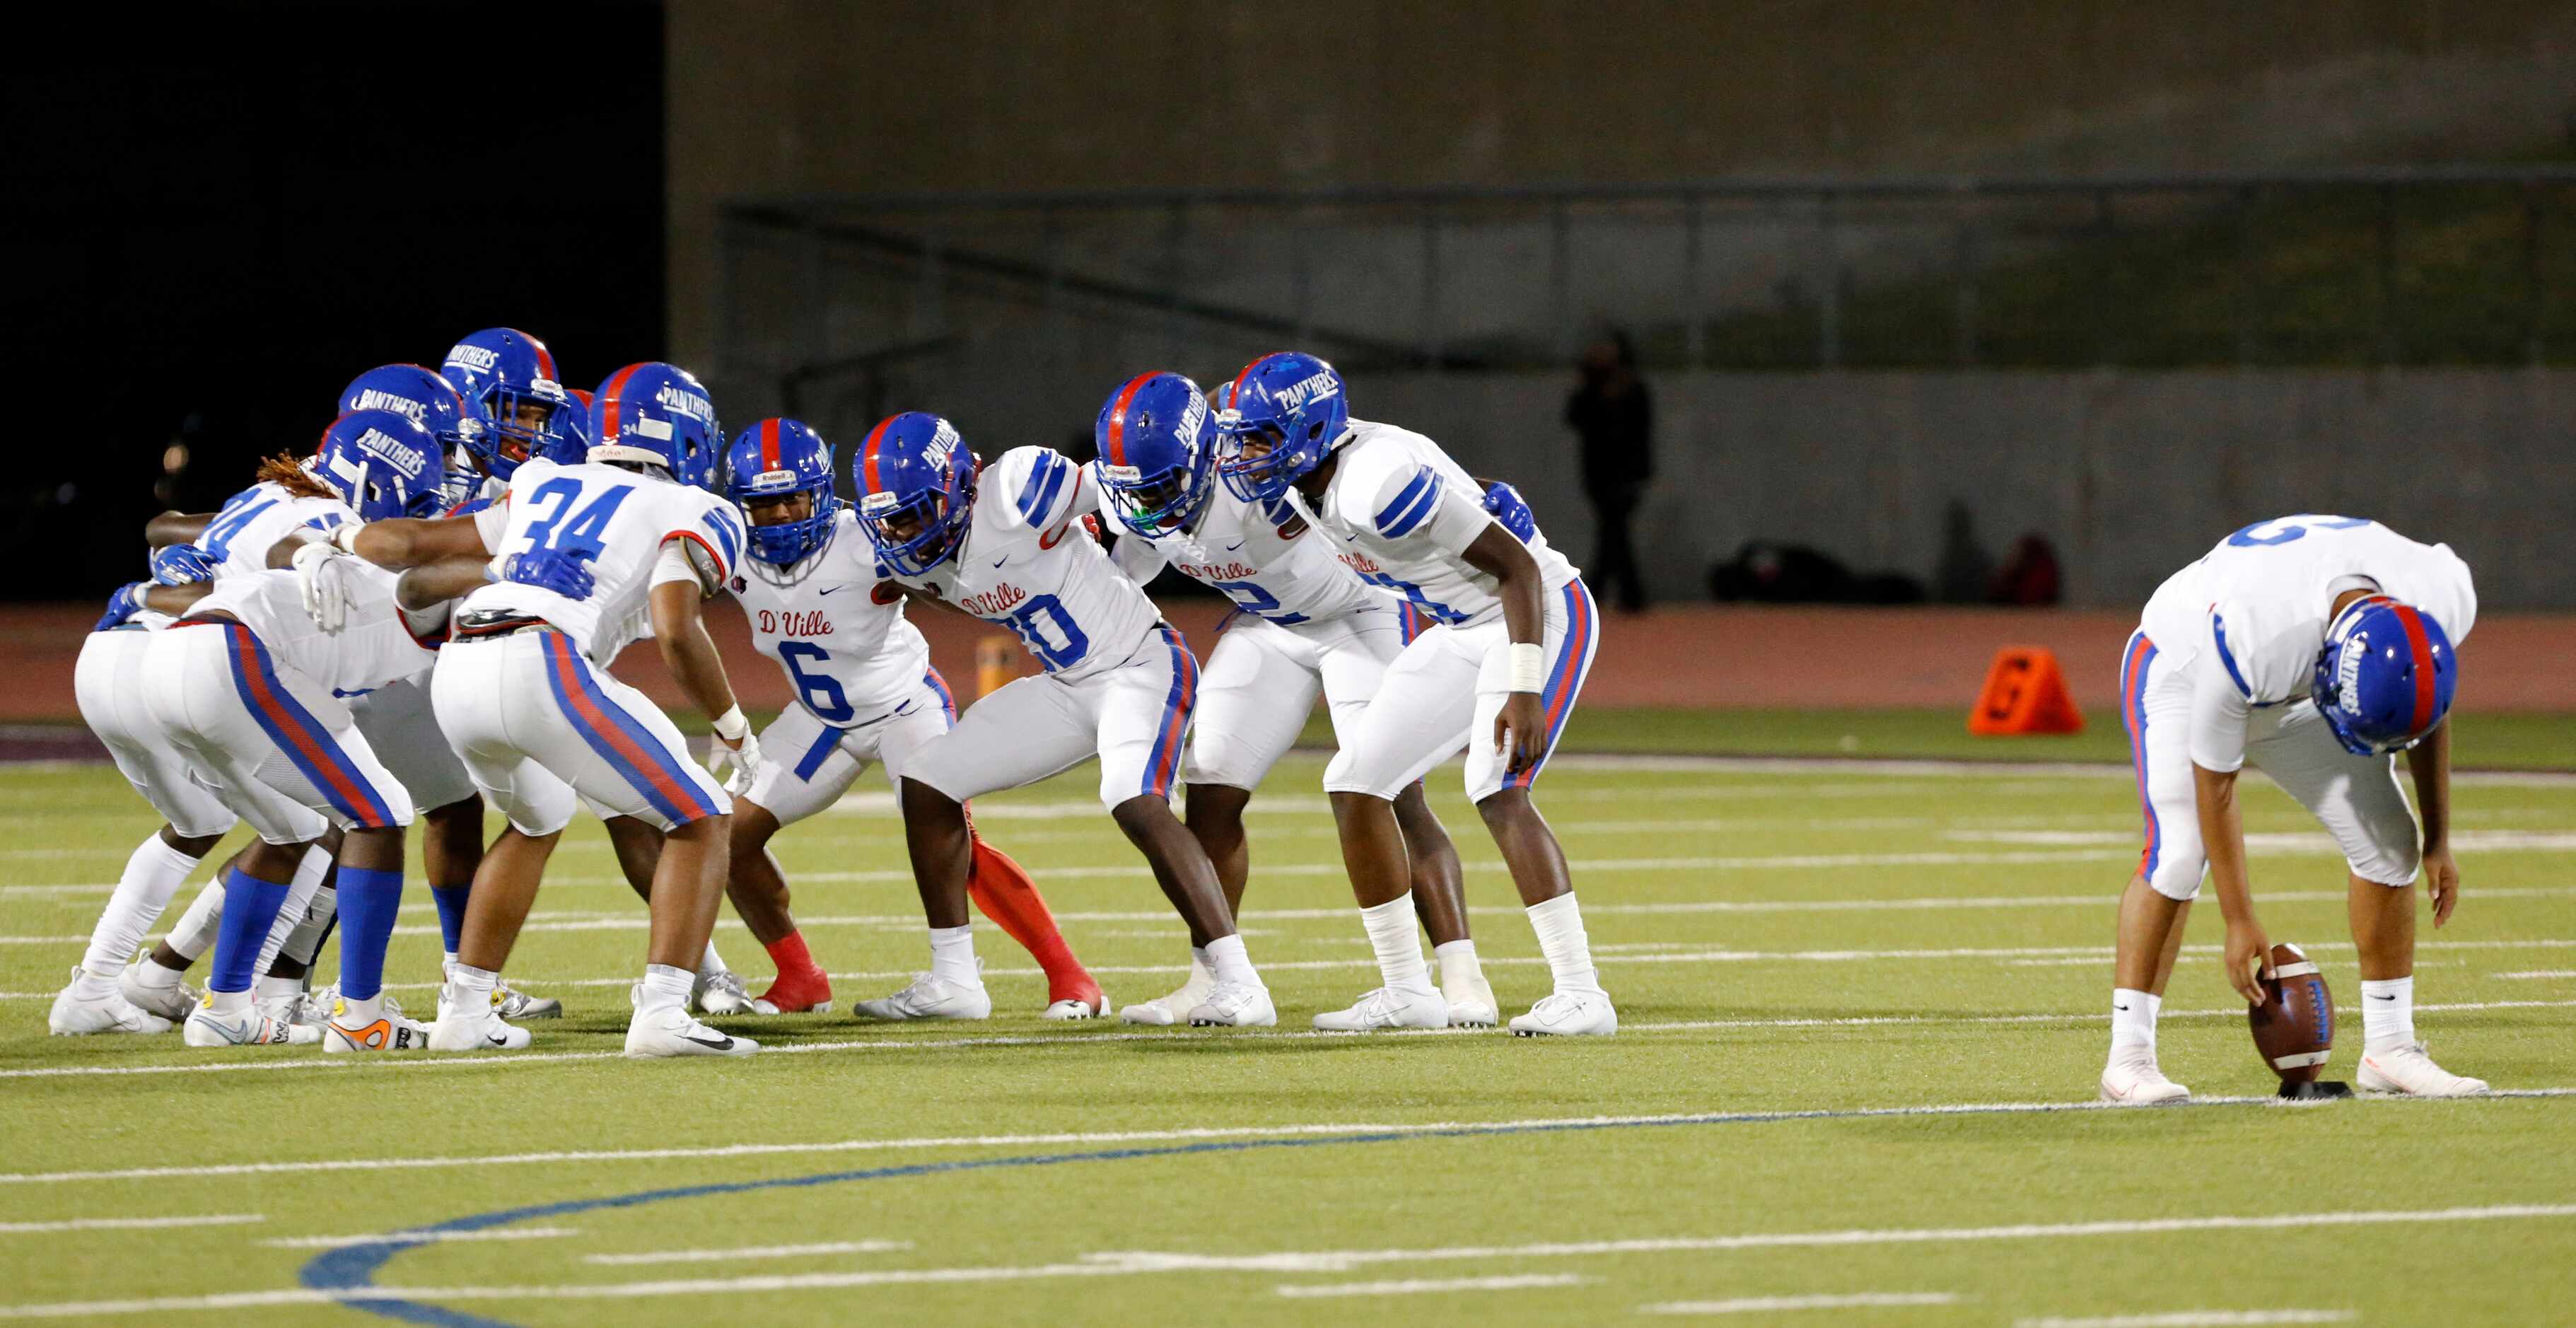 Duncanville’s kickoff team sways back and forth as the kicker tees up the football before a...